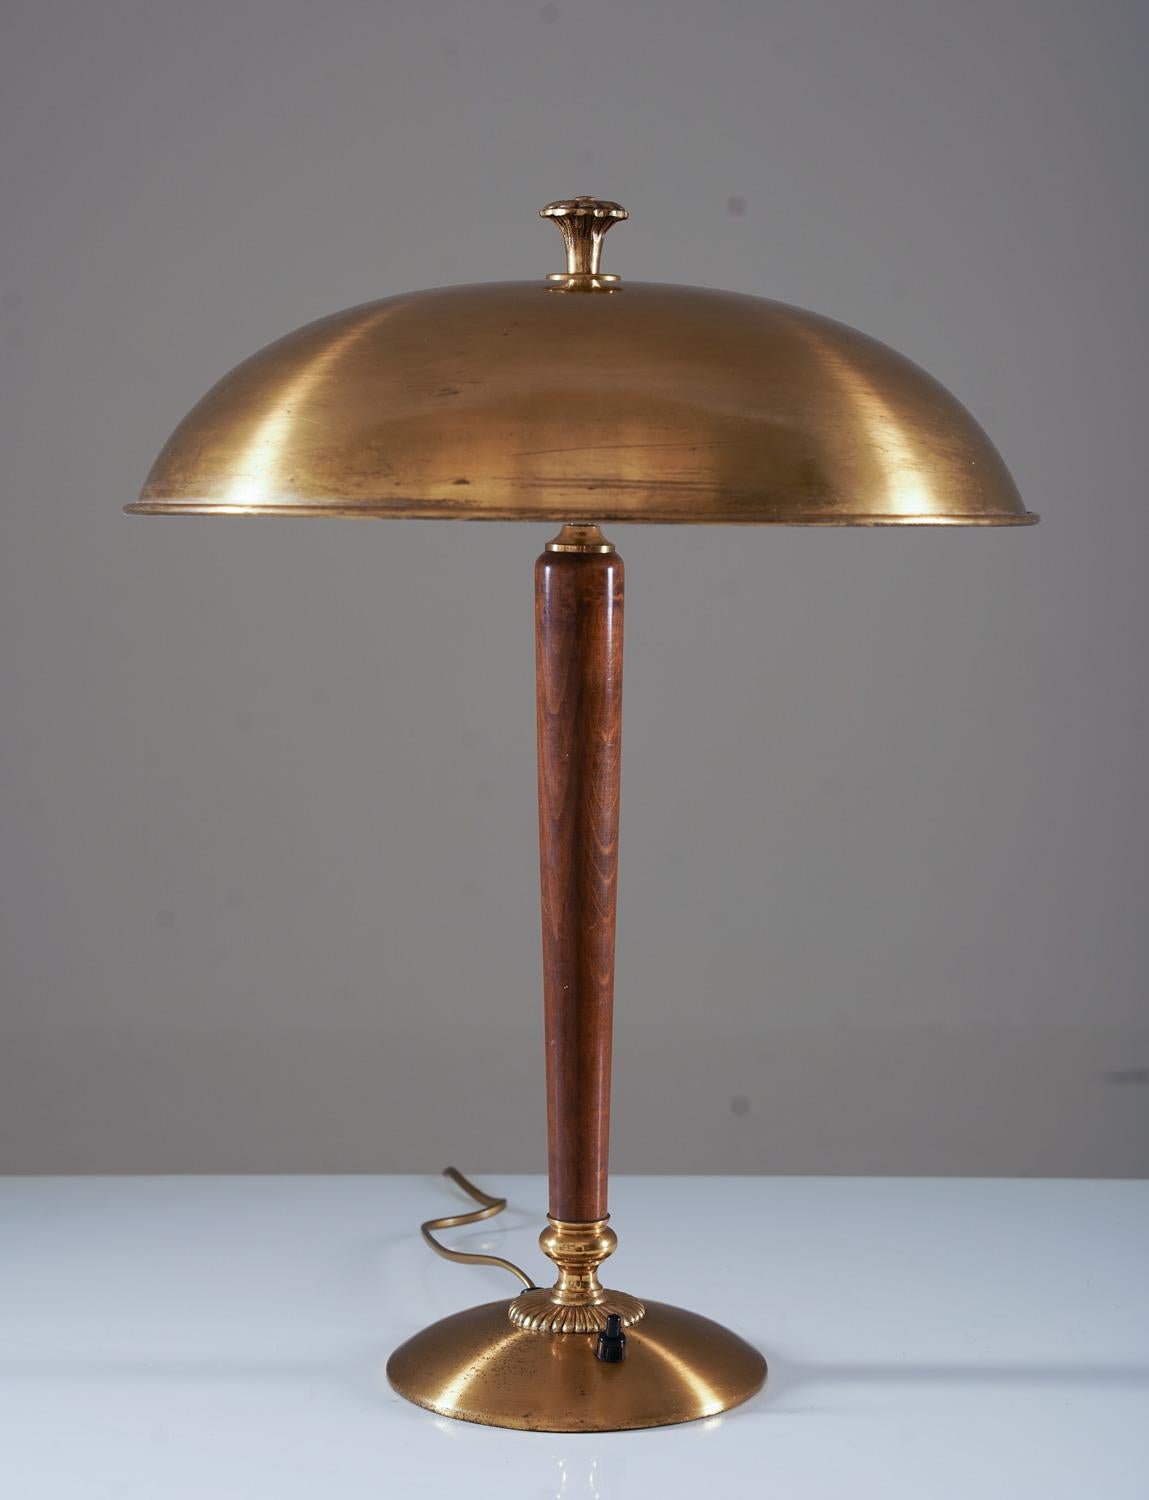 Elegant Scandinavian table lamp by Nordiska Kompaniet (NK), Sweden, 1920s.
This lamp is made of solid brass with details in mahogany.

Condition: Very good condition with patina and spots on the brass. The inner side of the shade has been